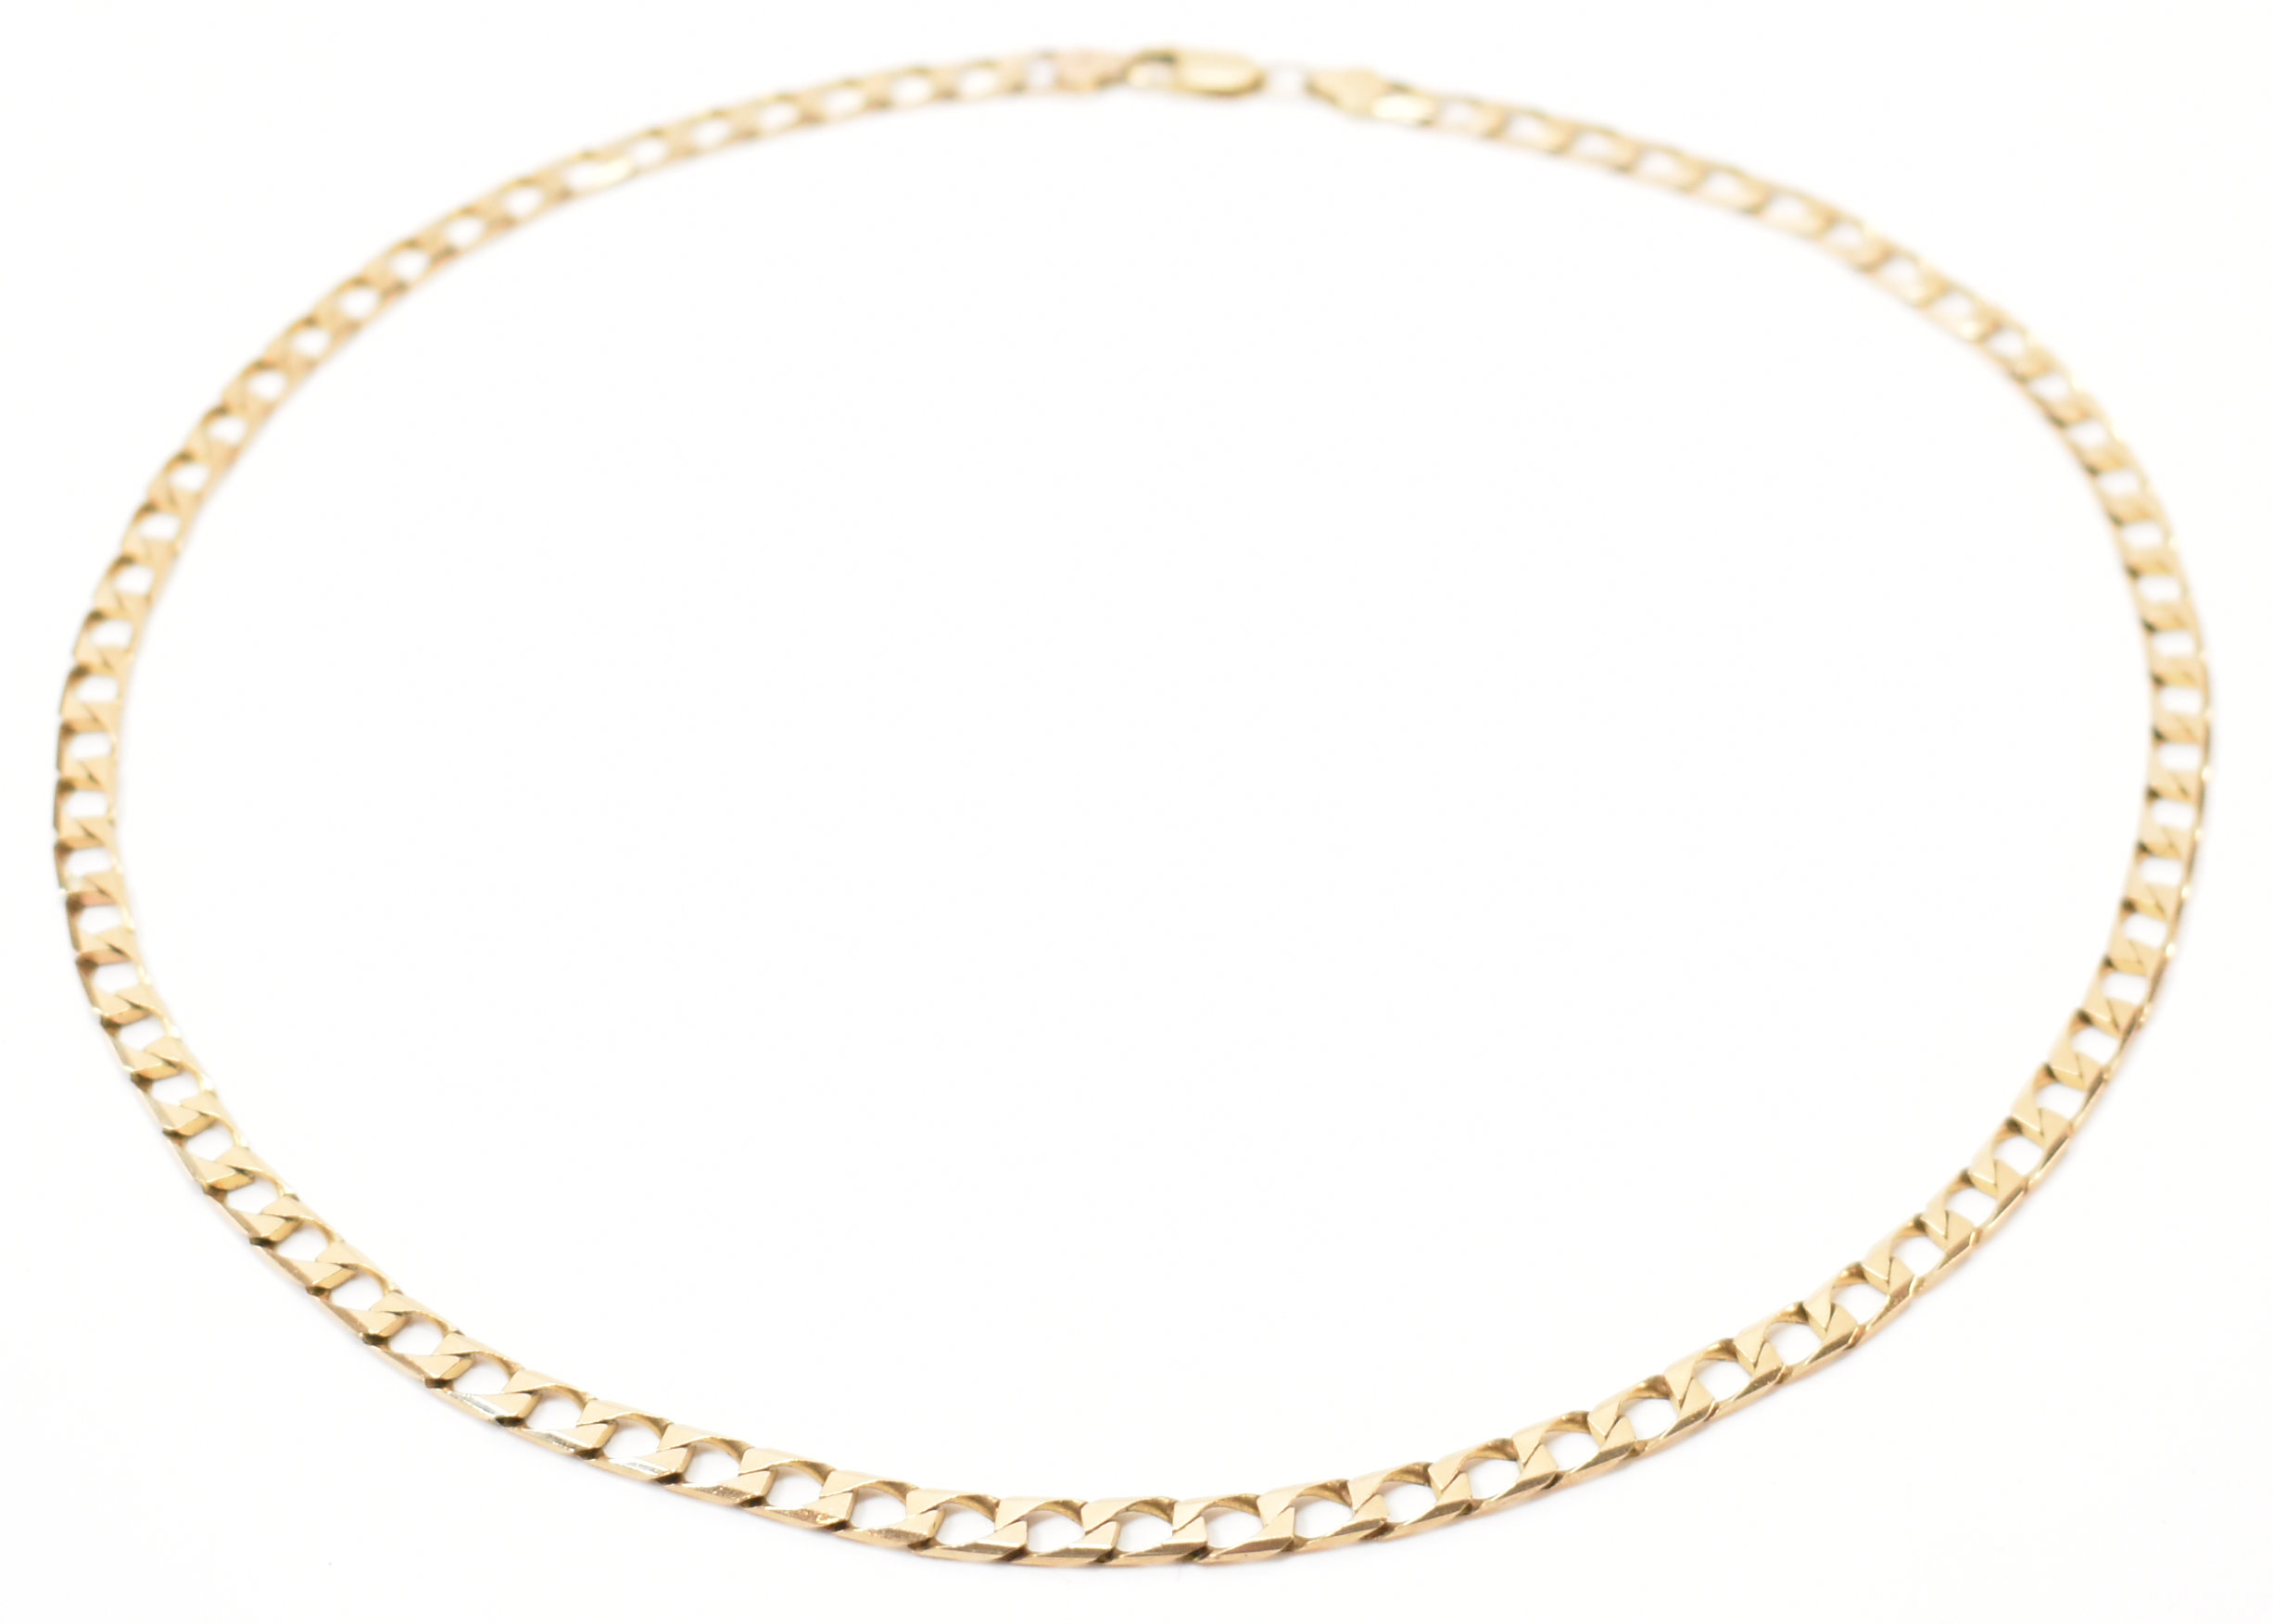 HALLMARKED 9CT GOLD FLAT CURB LINK NECKLACE CHAIN - Image 2 of 5